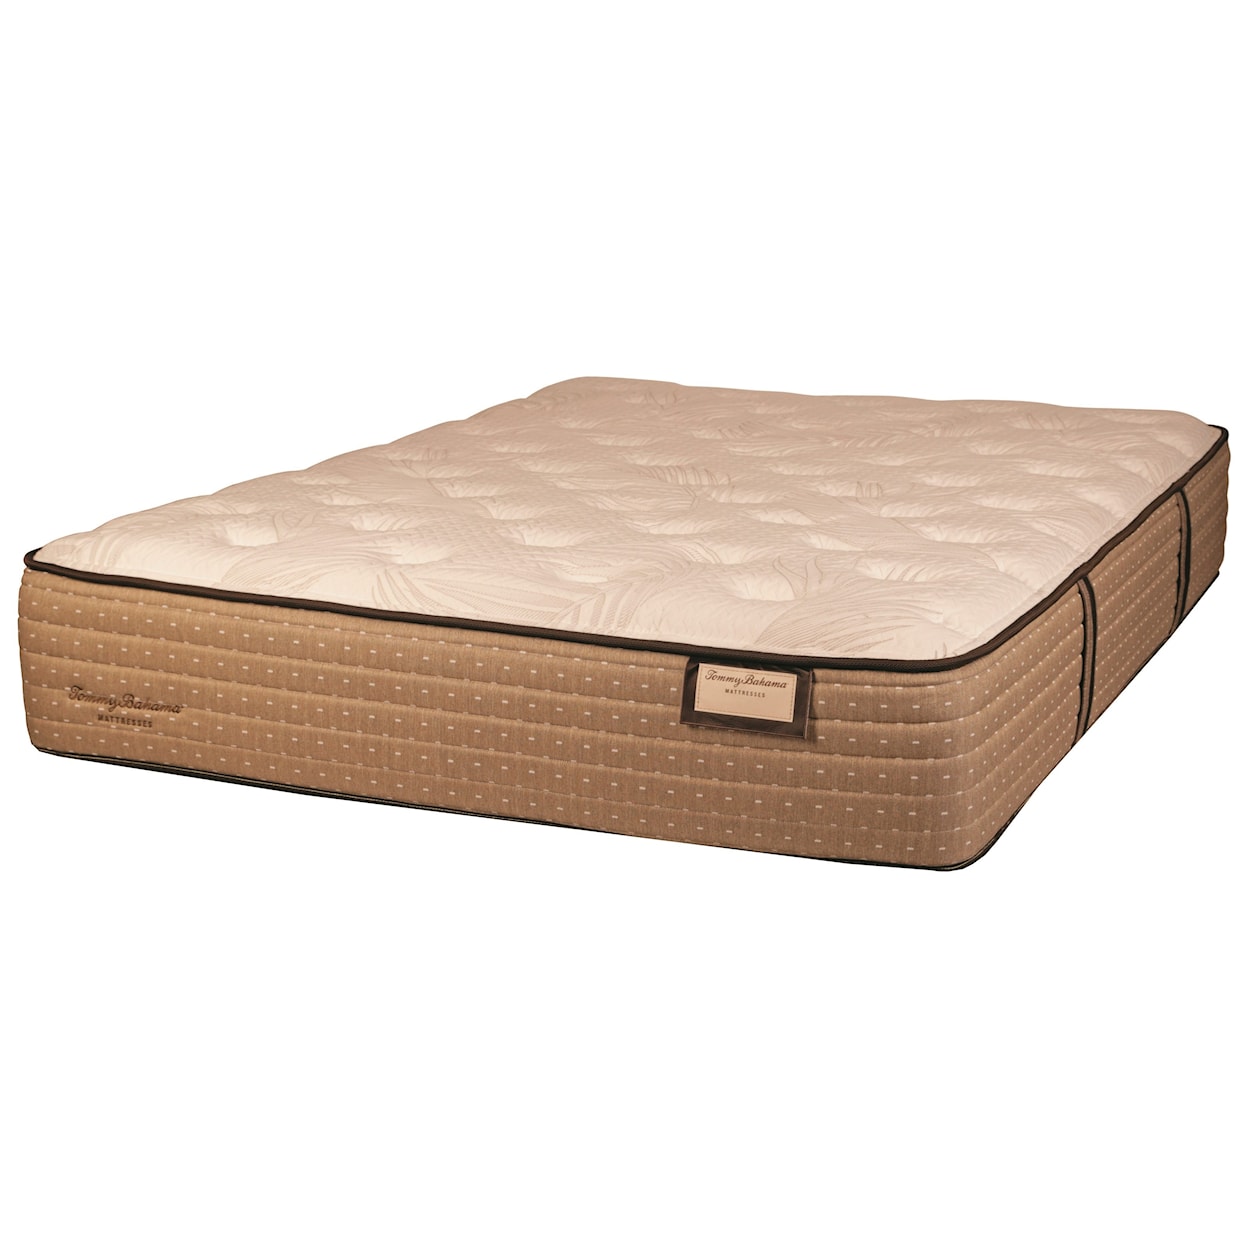 Therapedic Tommy Bahama Shake the Sand Firm 6034 Queen Firm Luxury Mattress